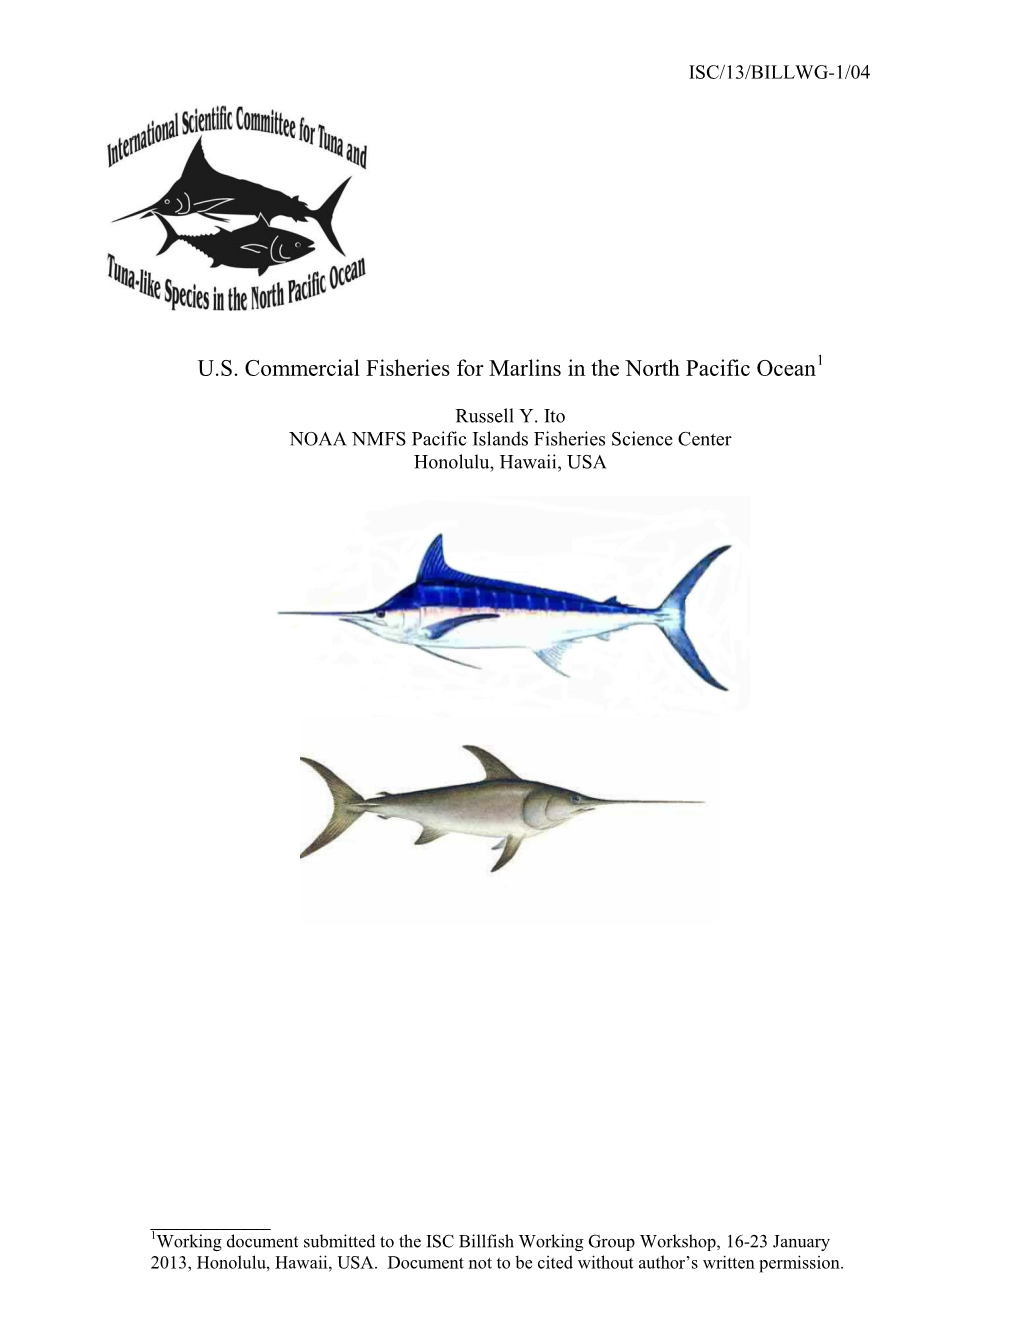 U.S. Commercial Fisheries for Marlins in the North Pacific Ocean1